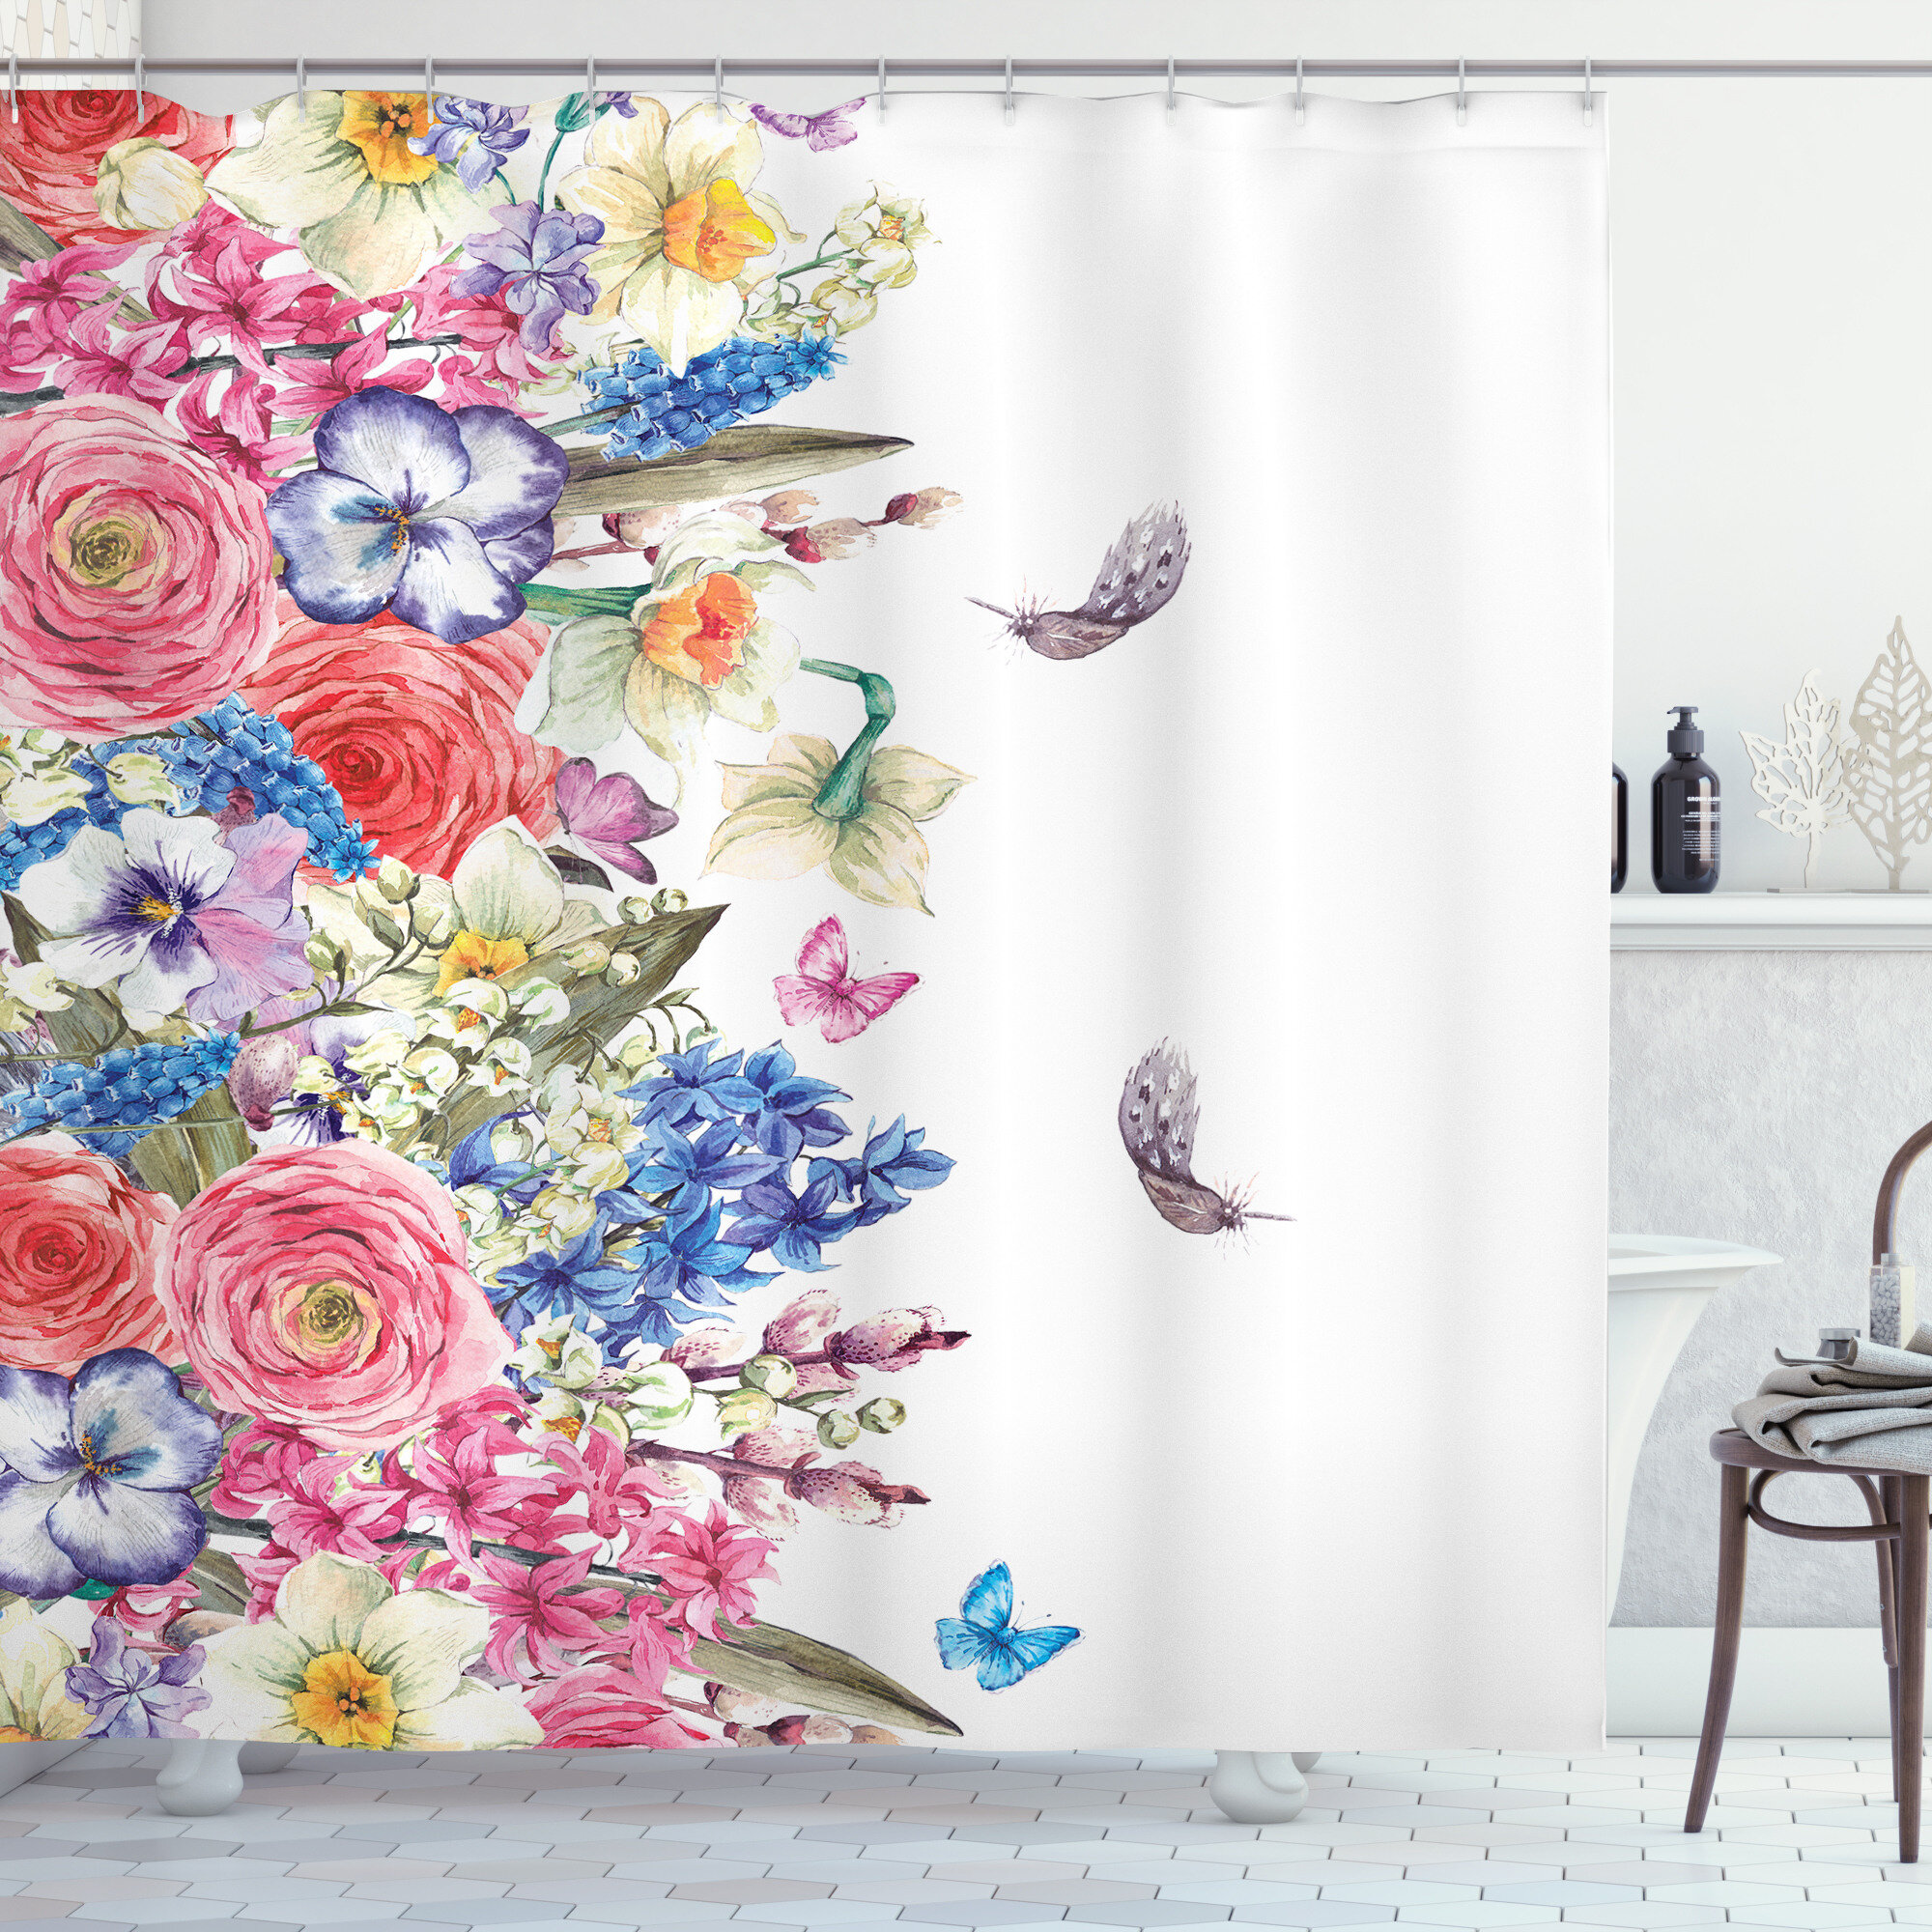 Vintage Floral Shower Curtain with Butterflies Flowers and Butterfly Bathroom Decor